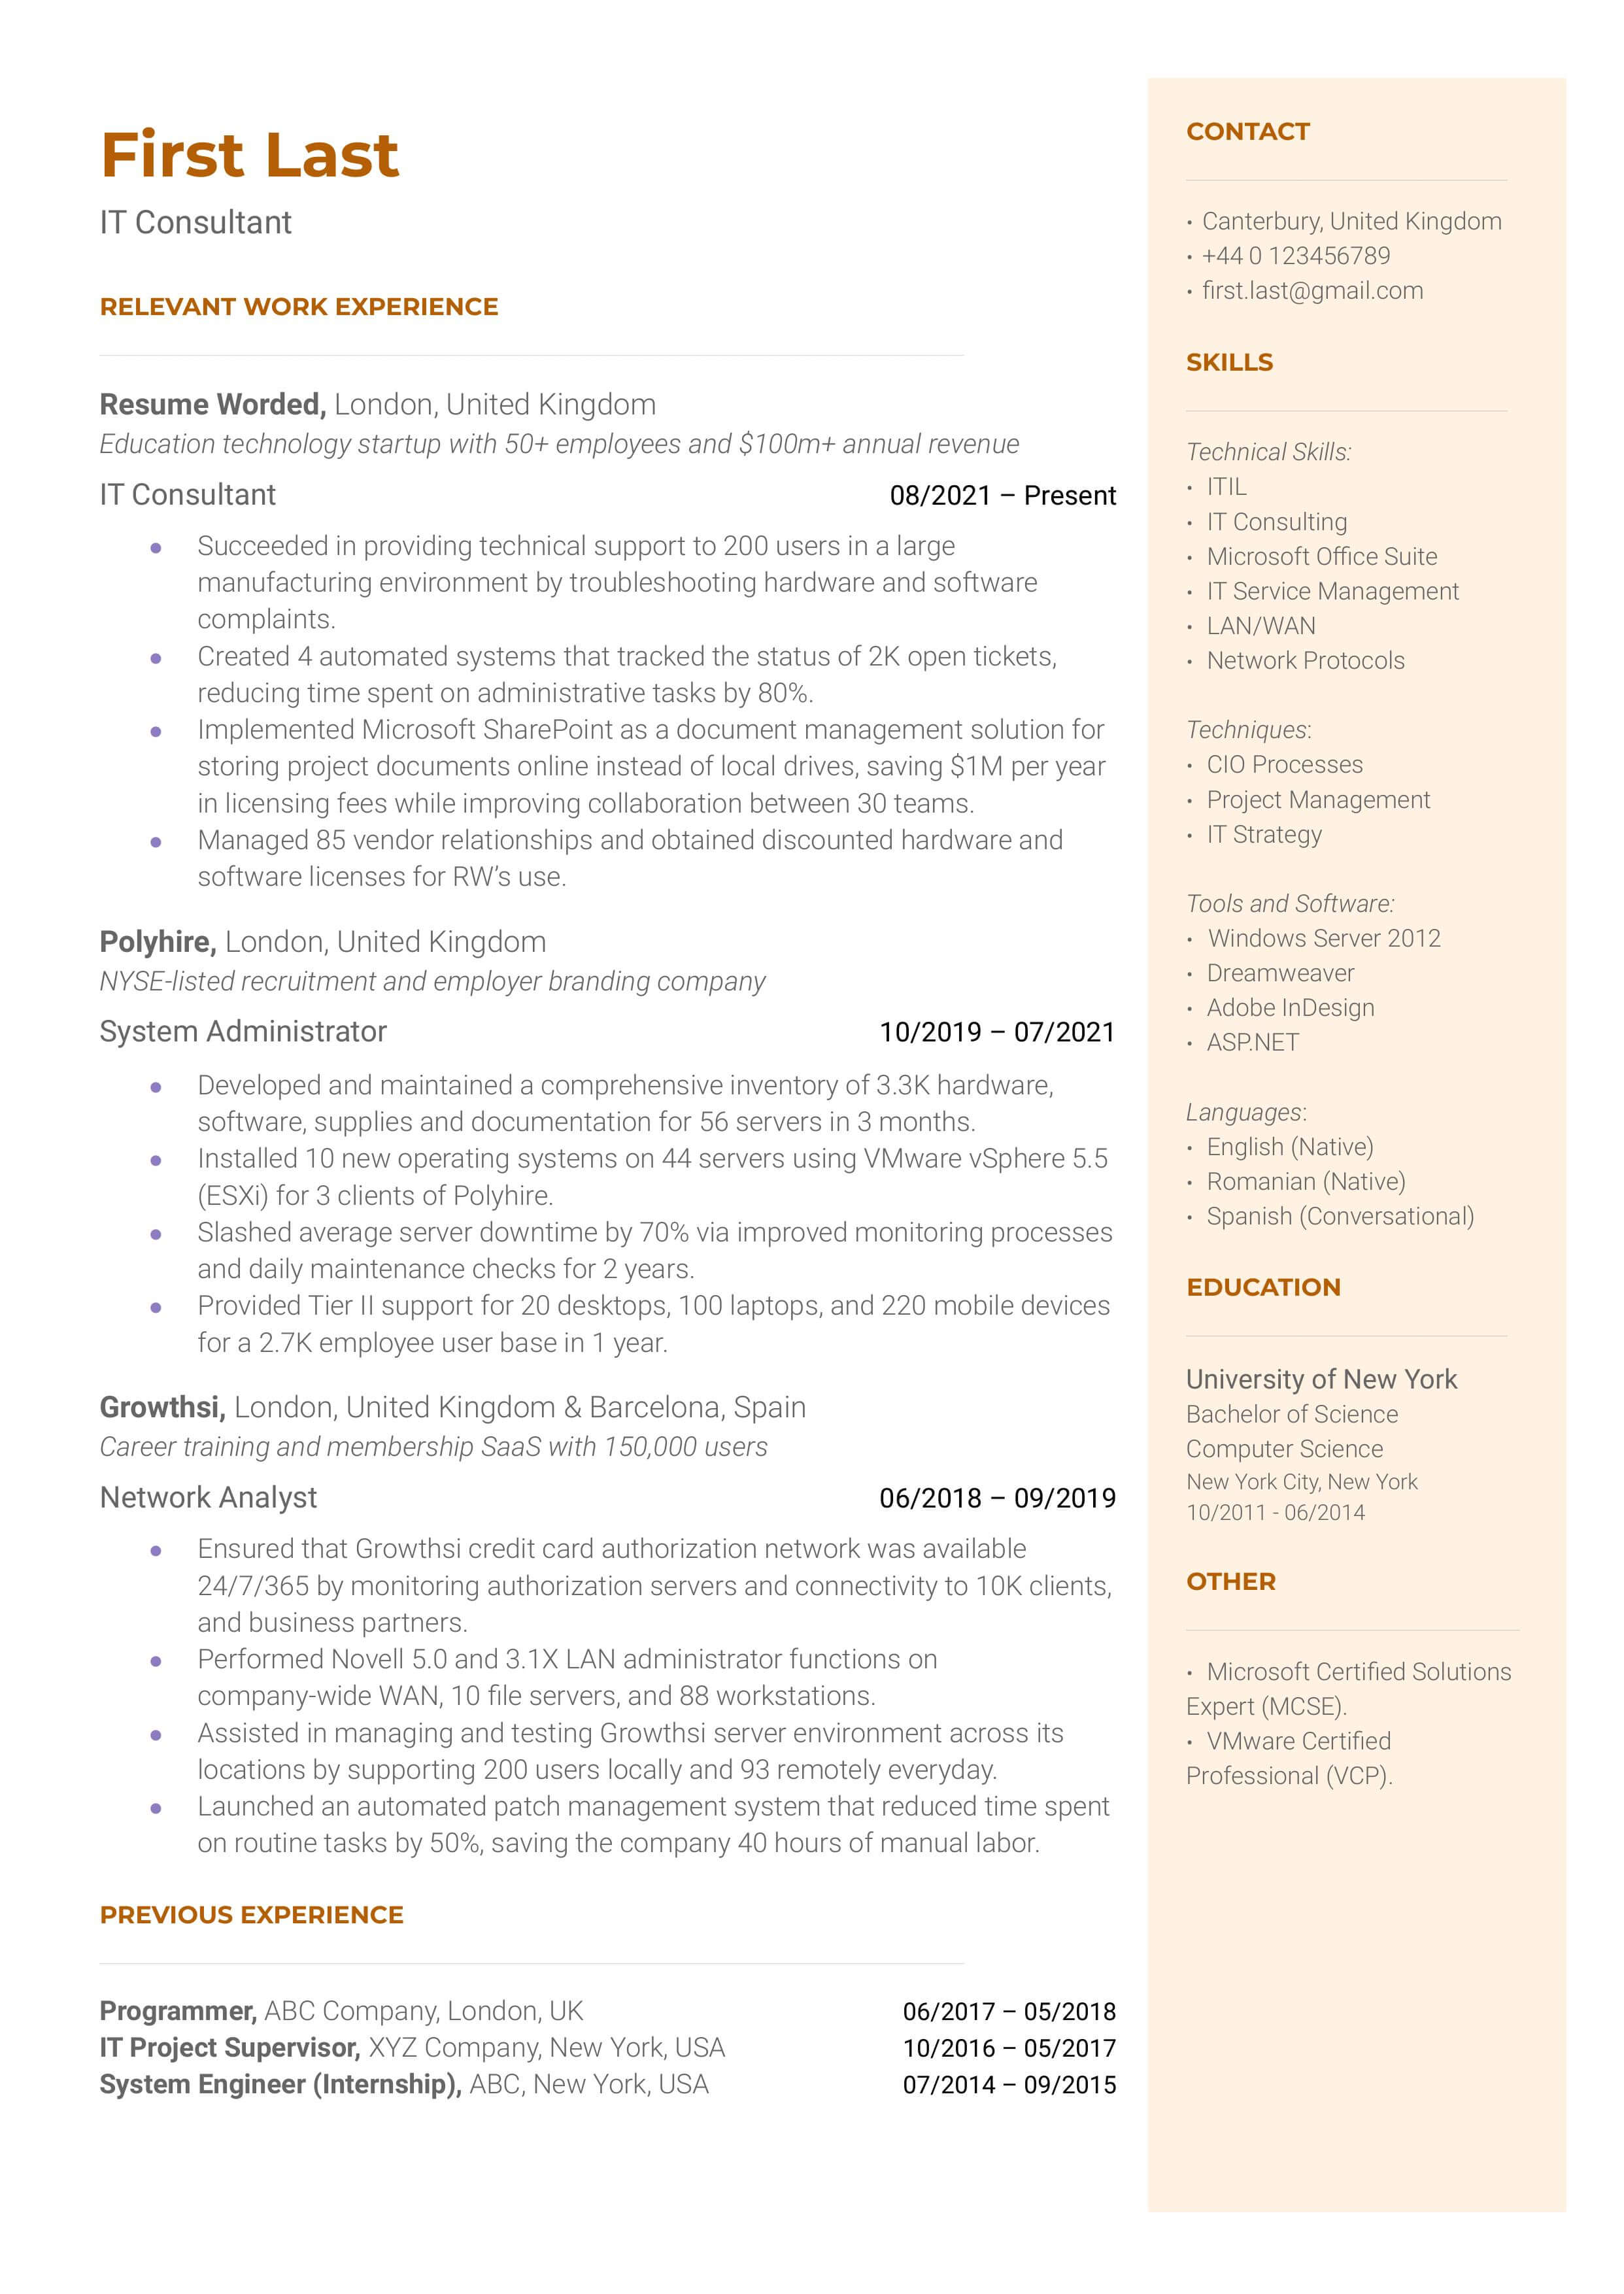 A professional CV showcasing technical and soft skills for IT Consultant roles.